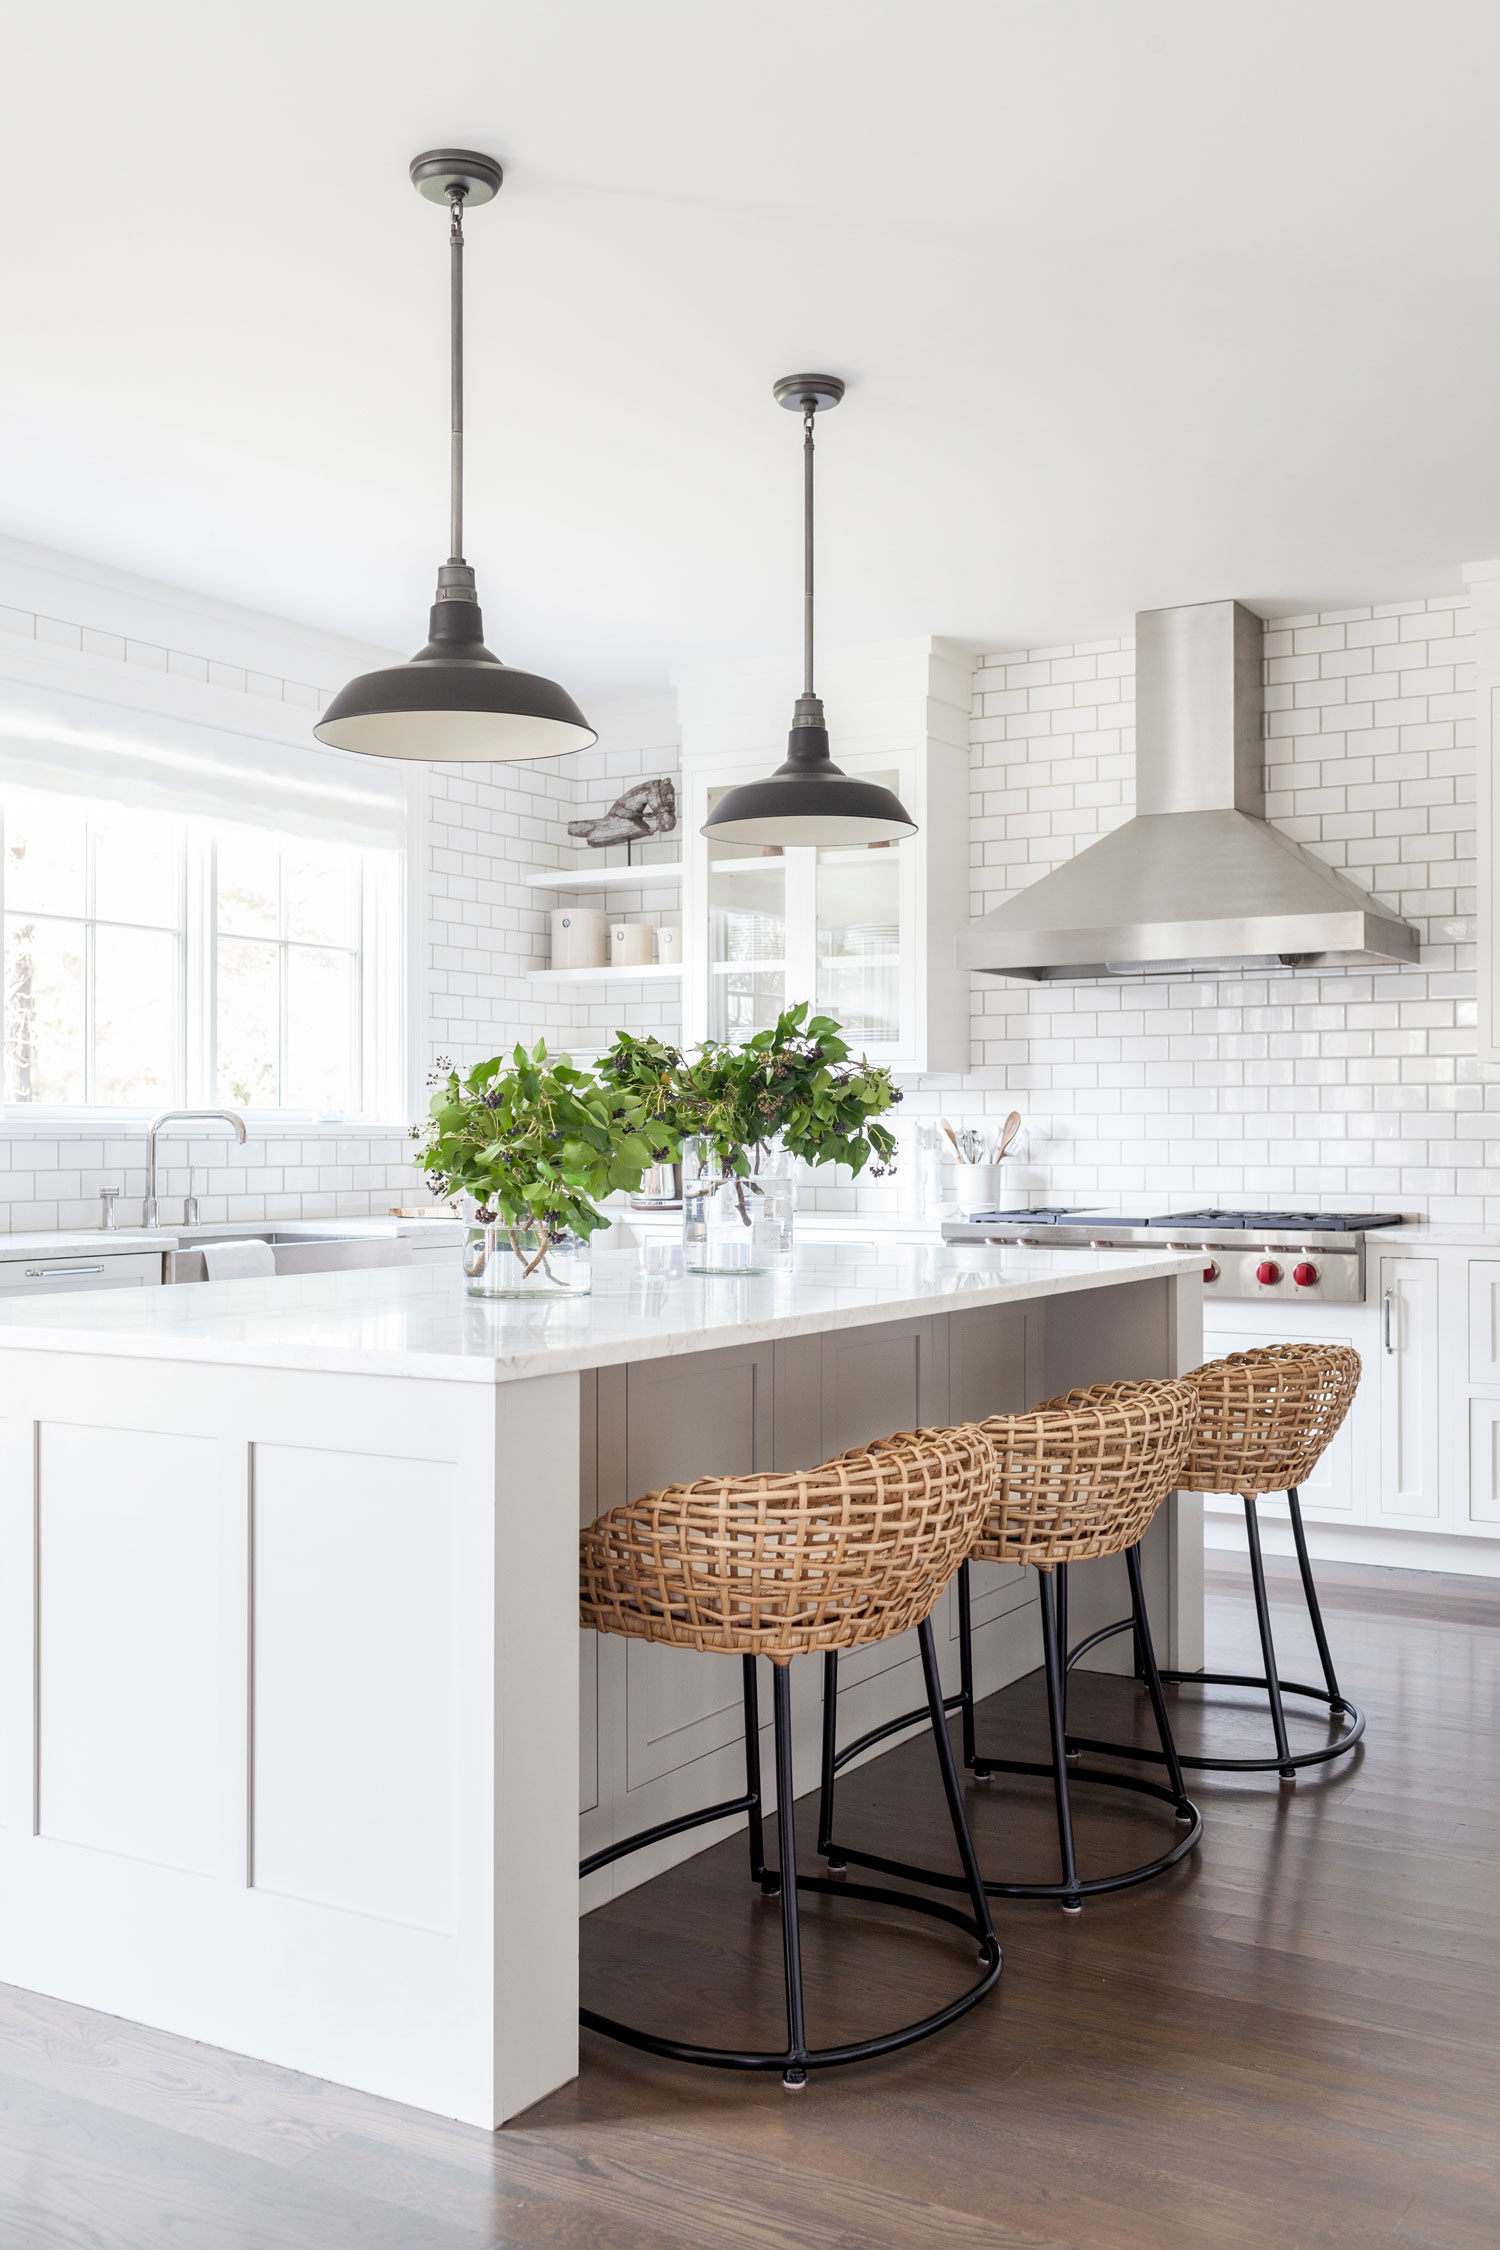 9 Dream Farmhouse Kitchen Designs to Inspire your Remodel - Check out these dreamy farmhouse inspired kitchens for amazing ideas to incorporate into your own kitchen. | https://heartenedhome.com 